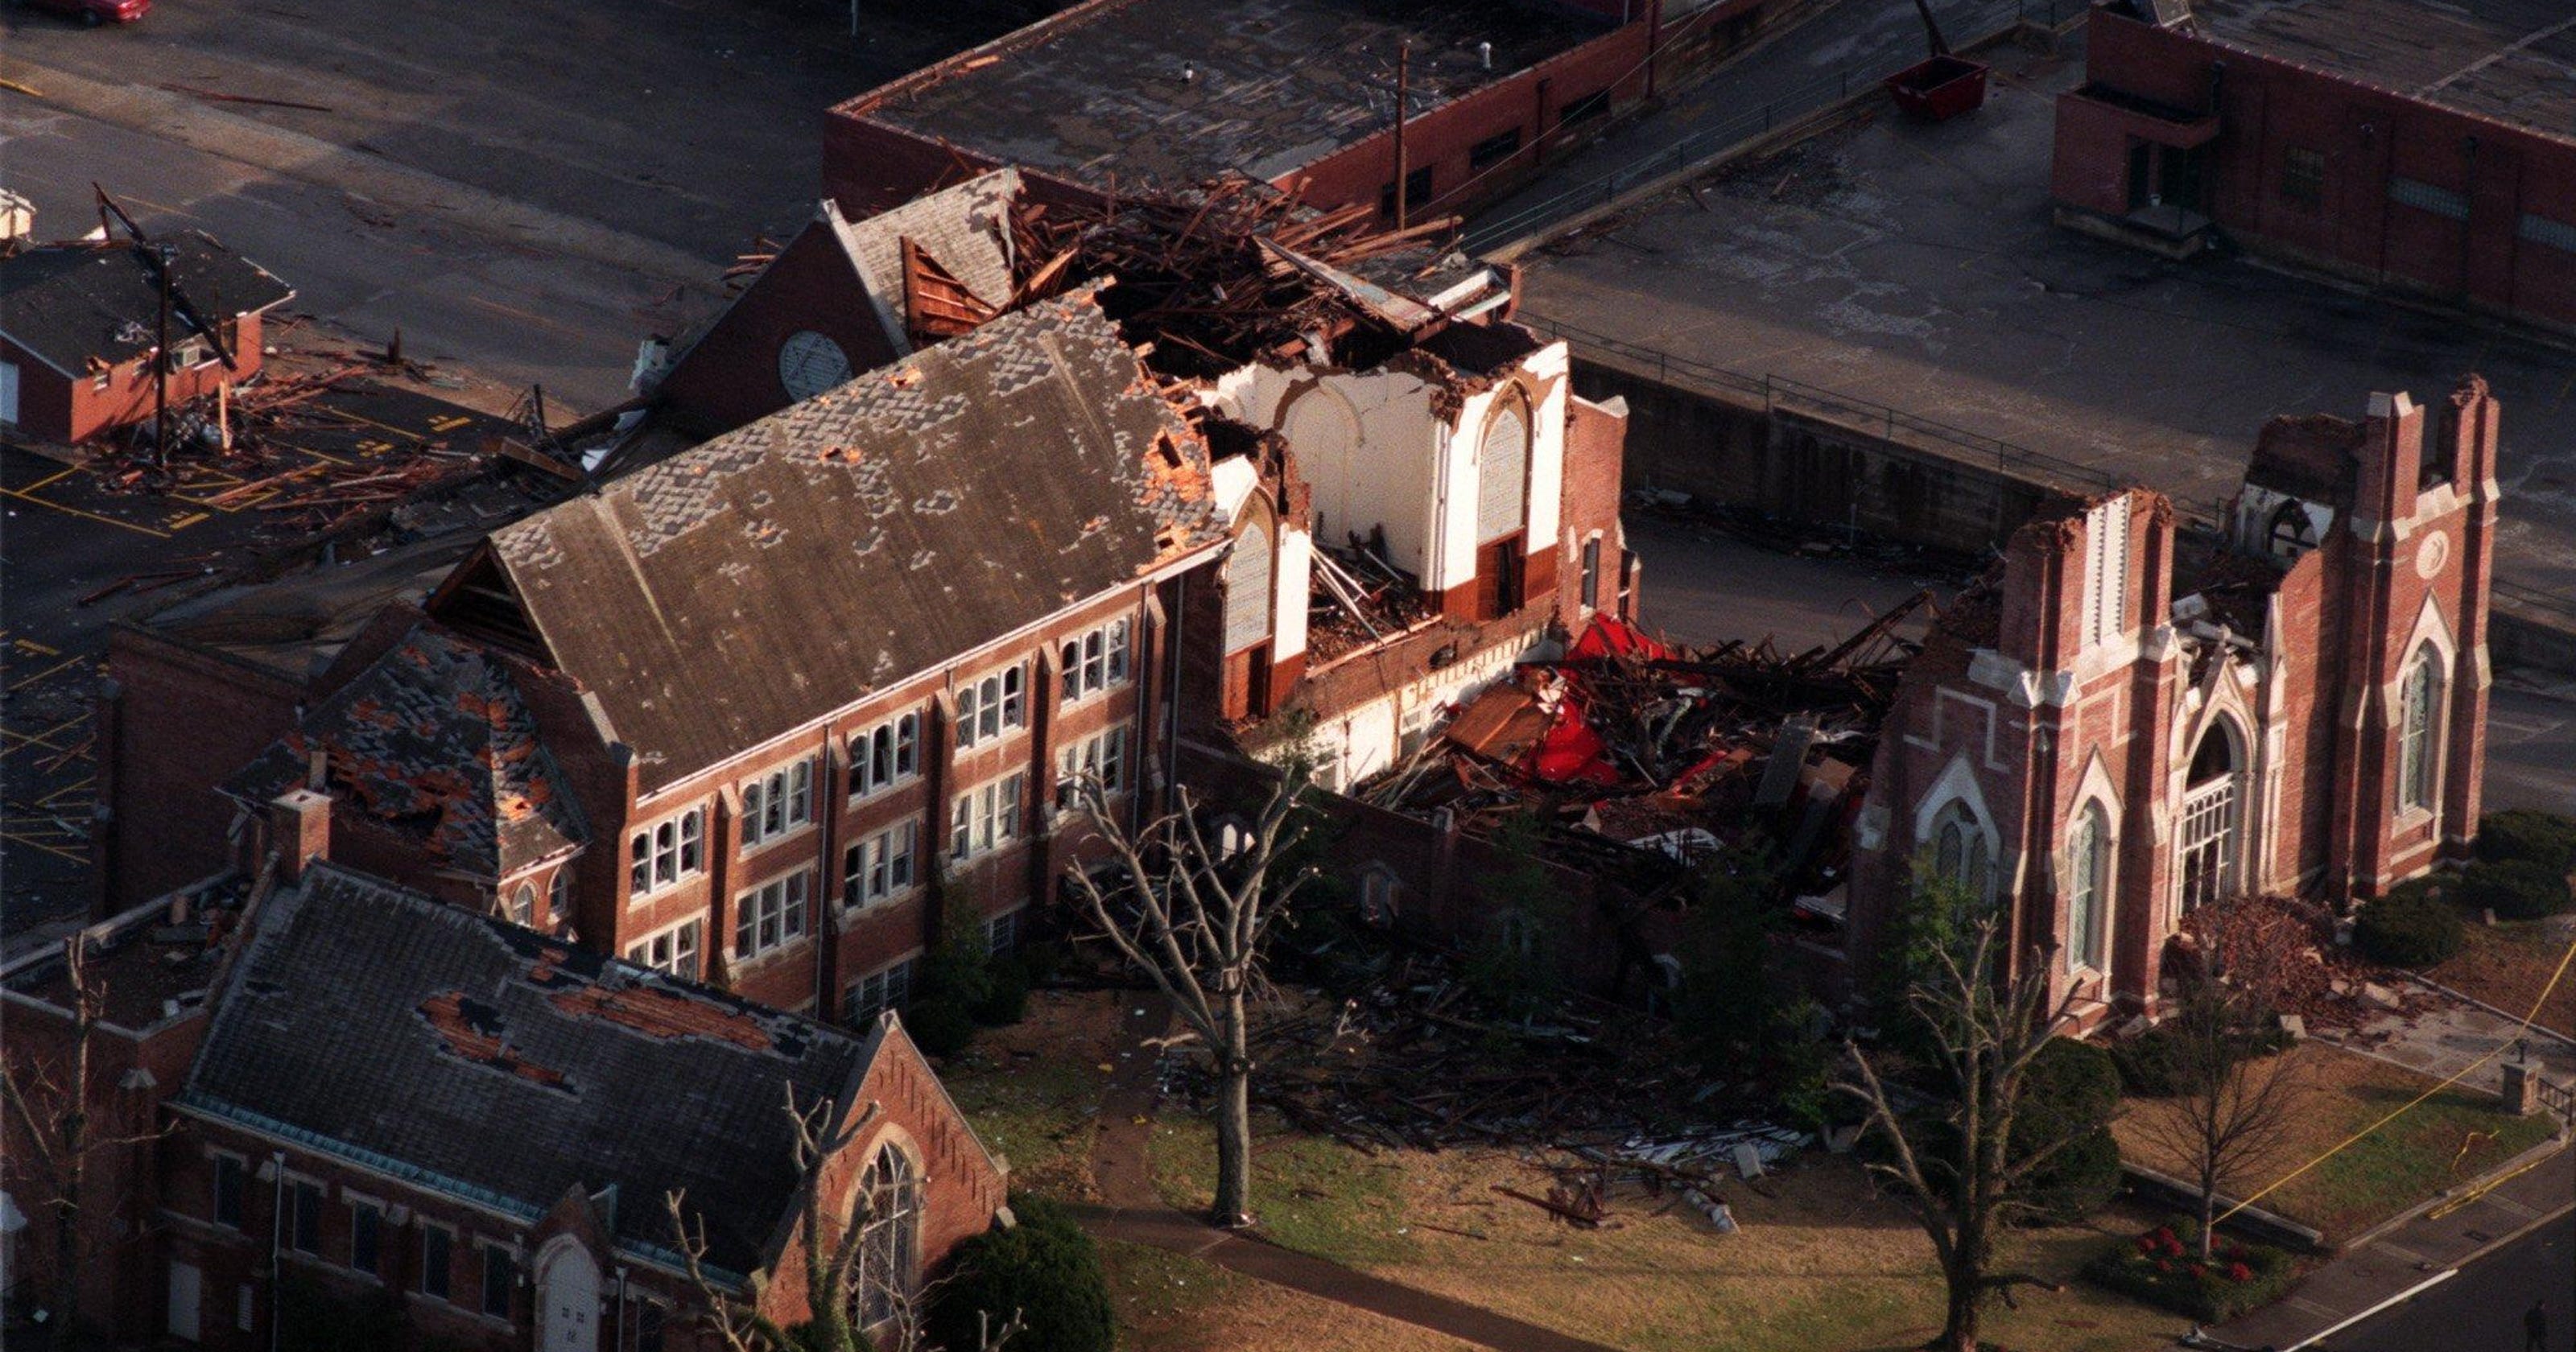 Clarksville tornado of 1999 Remembering the downtown destruction